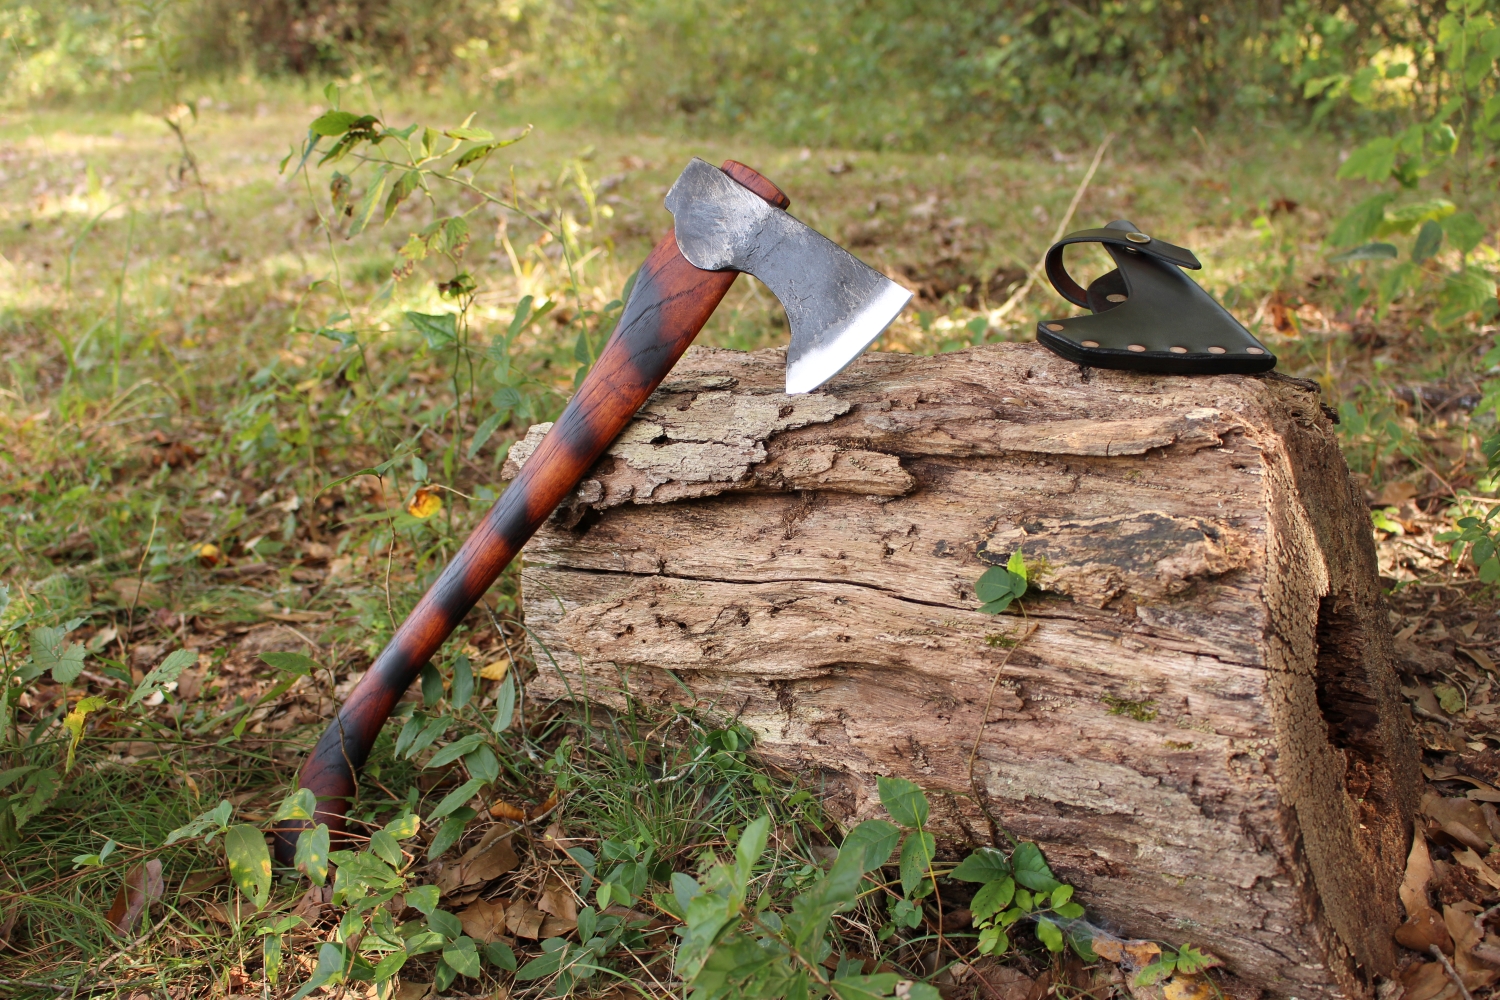 The Bush Axe – Wolf Valley Forge